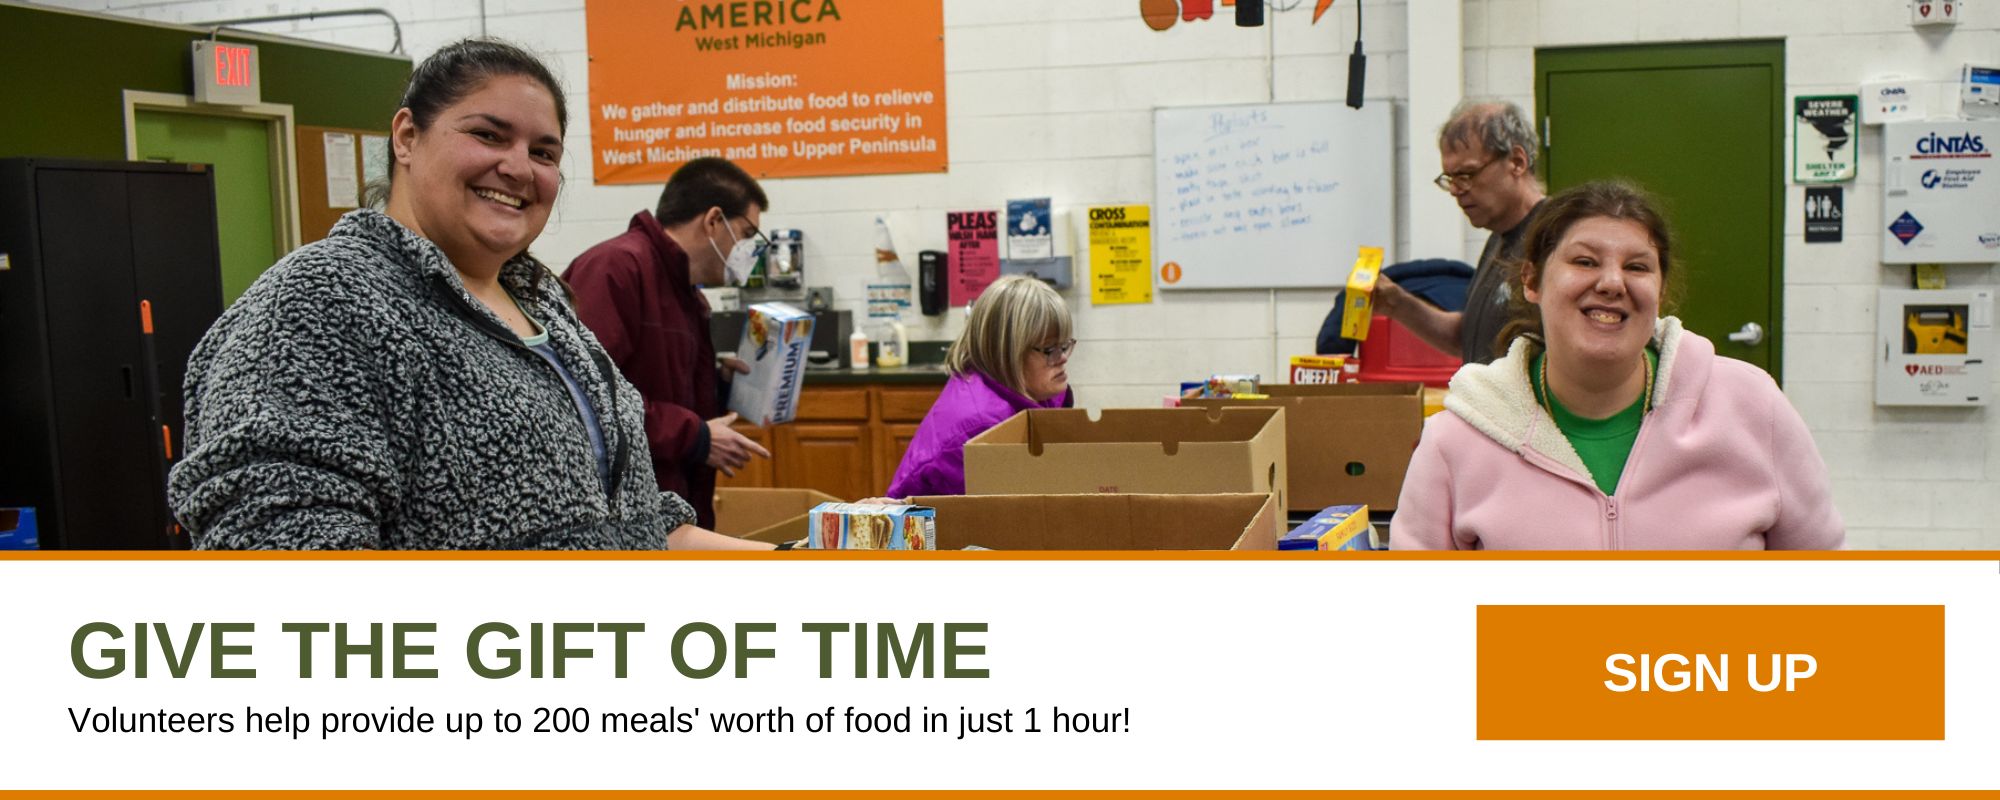 Give the gift of time. Volunteers help provide up to 200 meals' worth of food in just 1 hour! Sign up